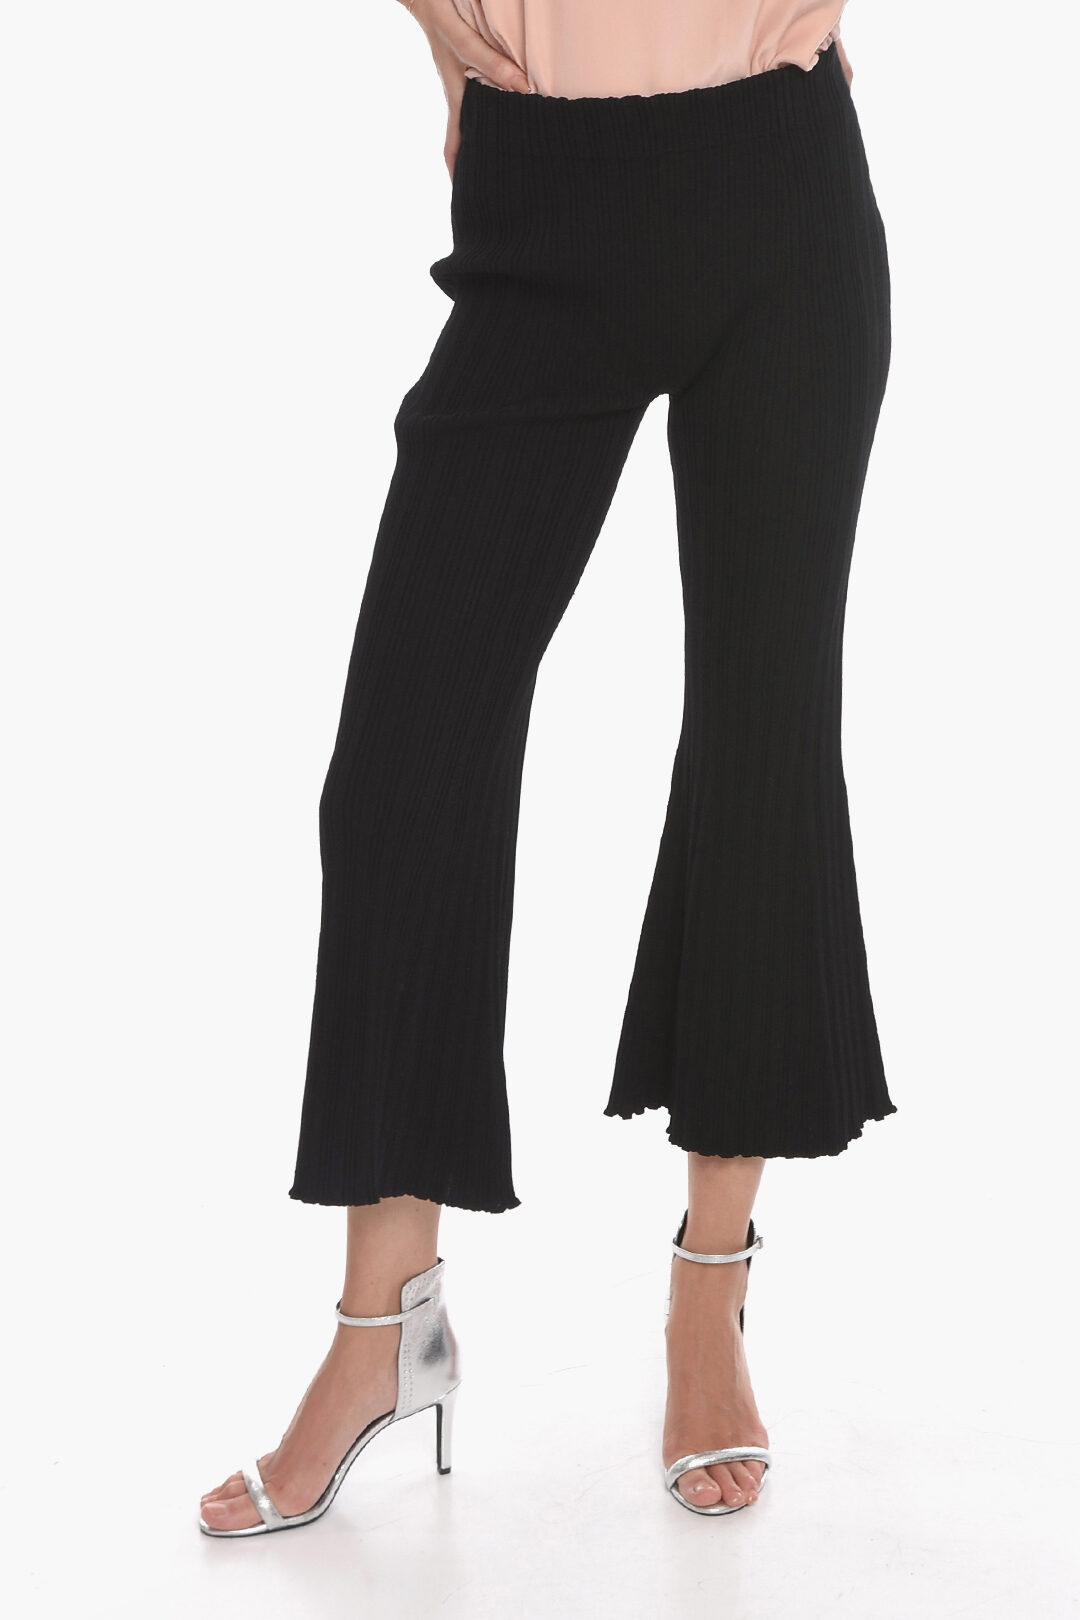 Proenza Schouler Ribbed Knit Flared Pants women - Glamood Outlet